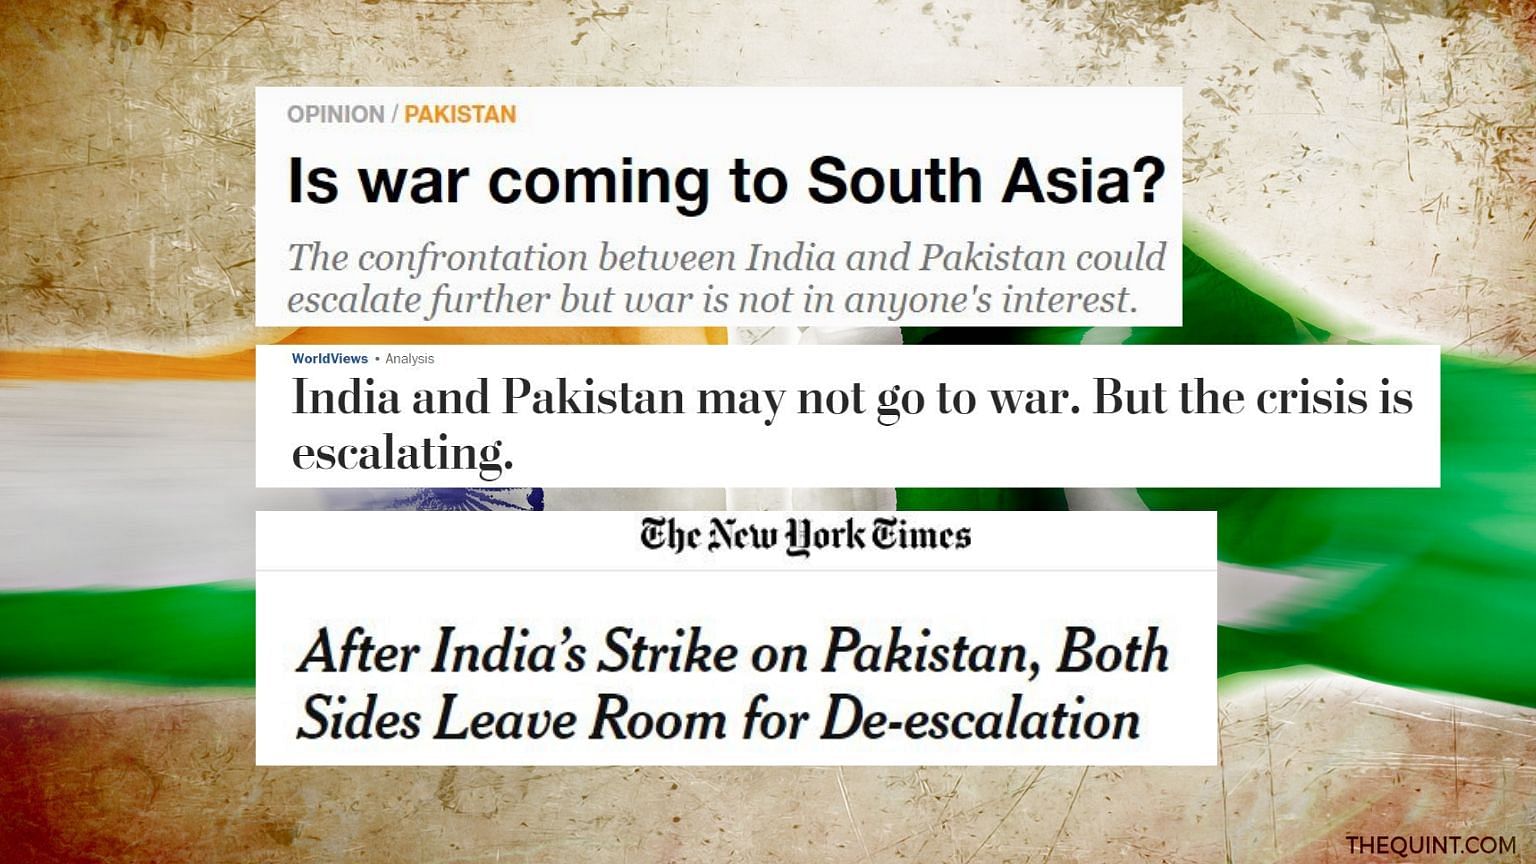 Post Pulwama, there has been escalating tension between India and Pakistan.